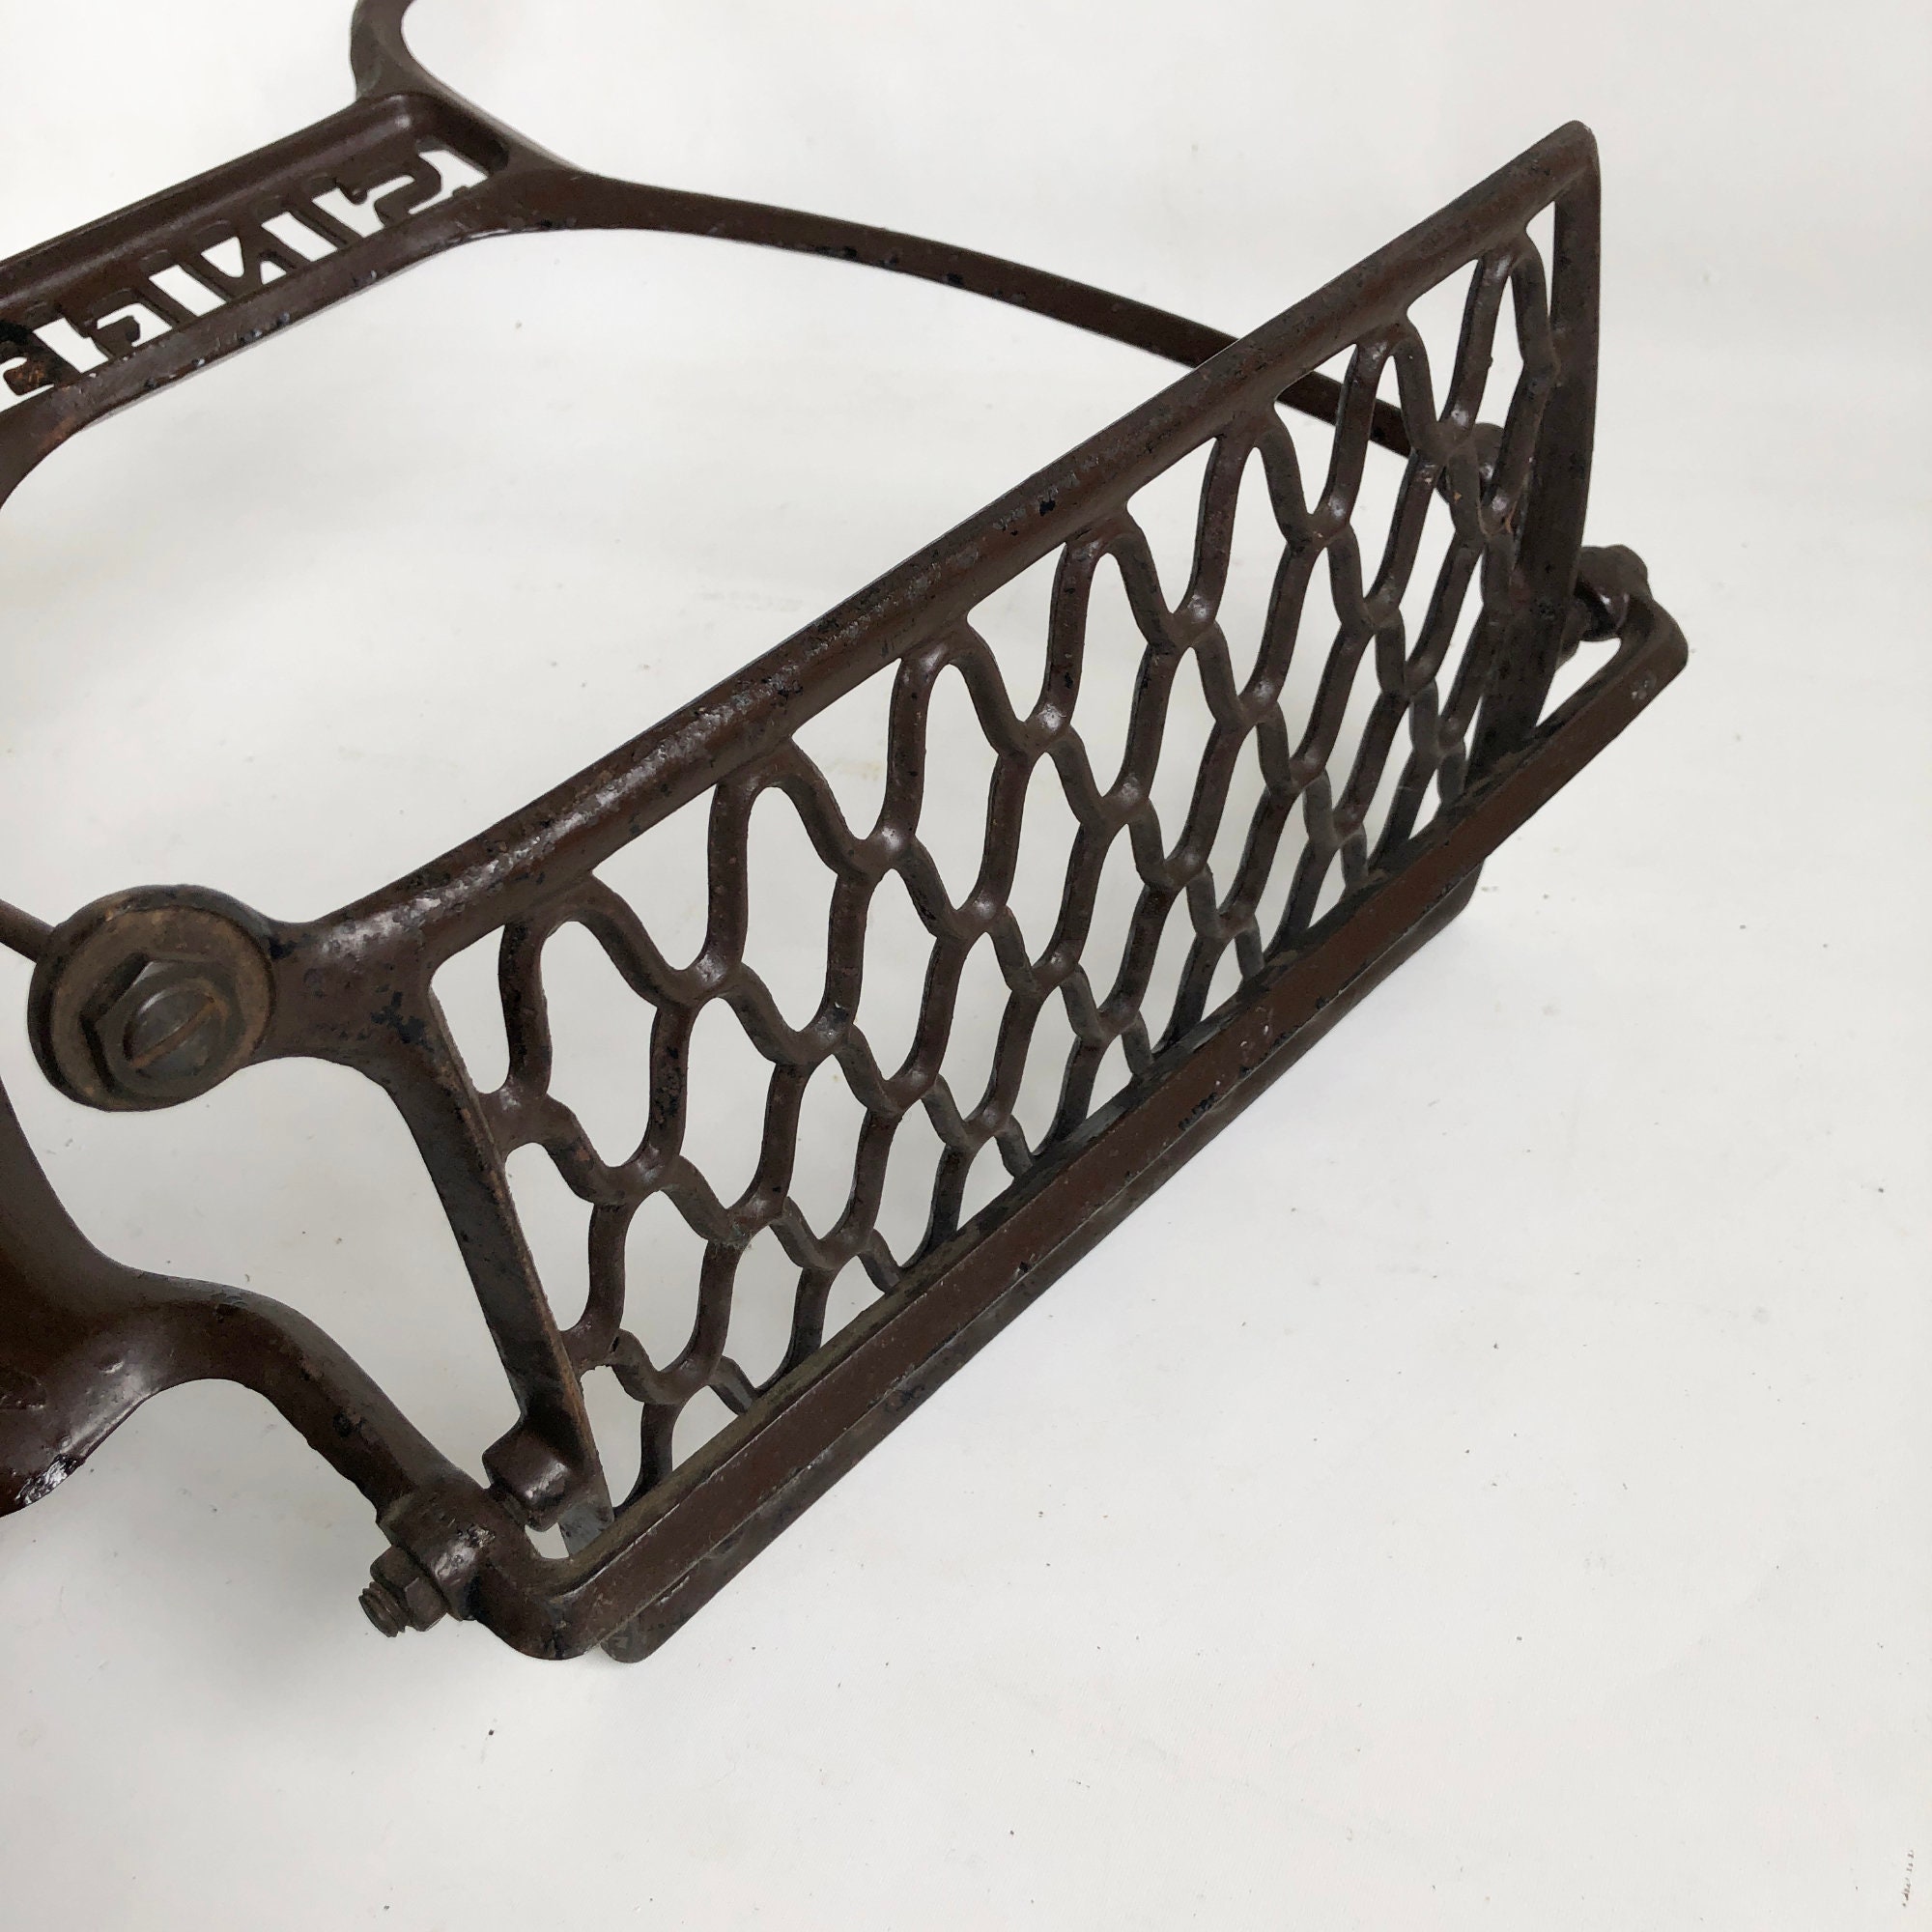 Antique Cast Iron Singer Treadle Sewing Machine Frame, Foot Pedal